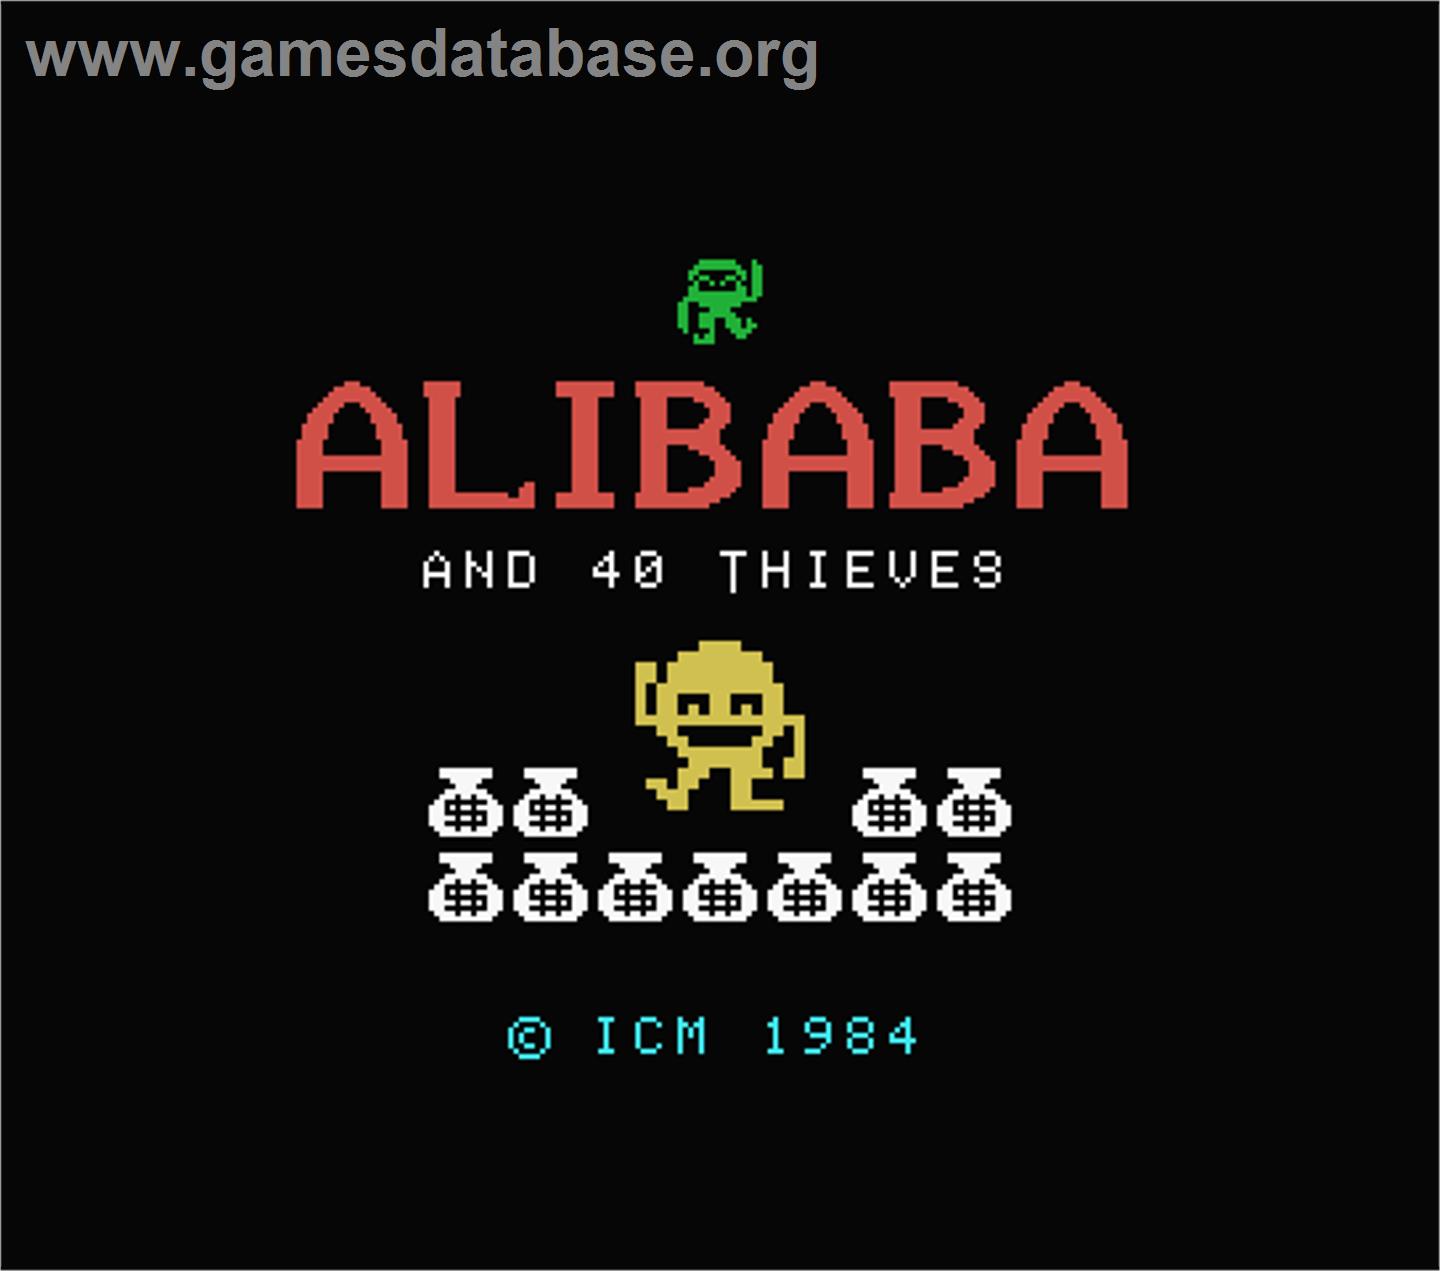 Alibaba and 40 Thieves - MSX - Artwork - Title Screen